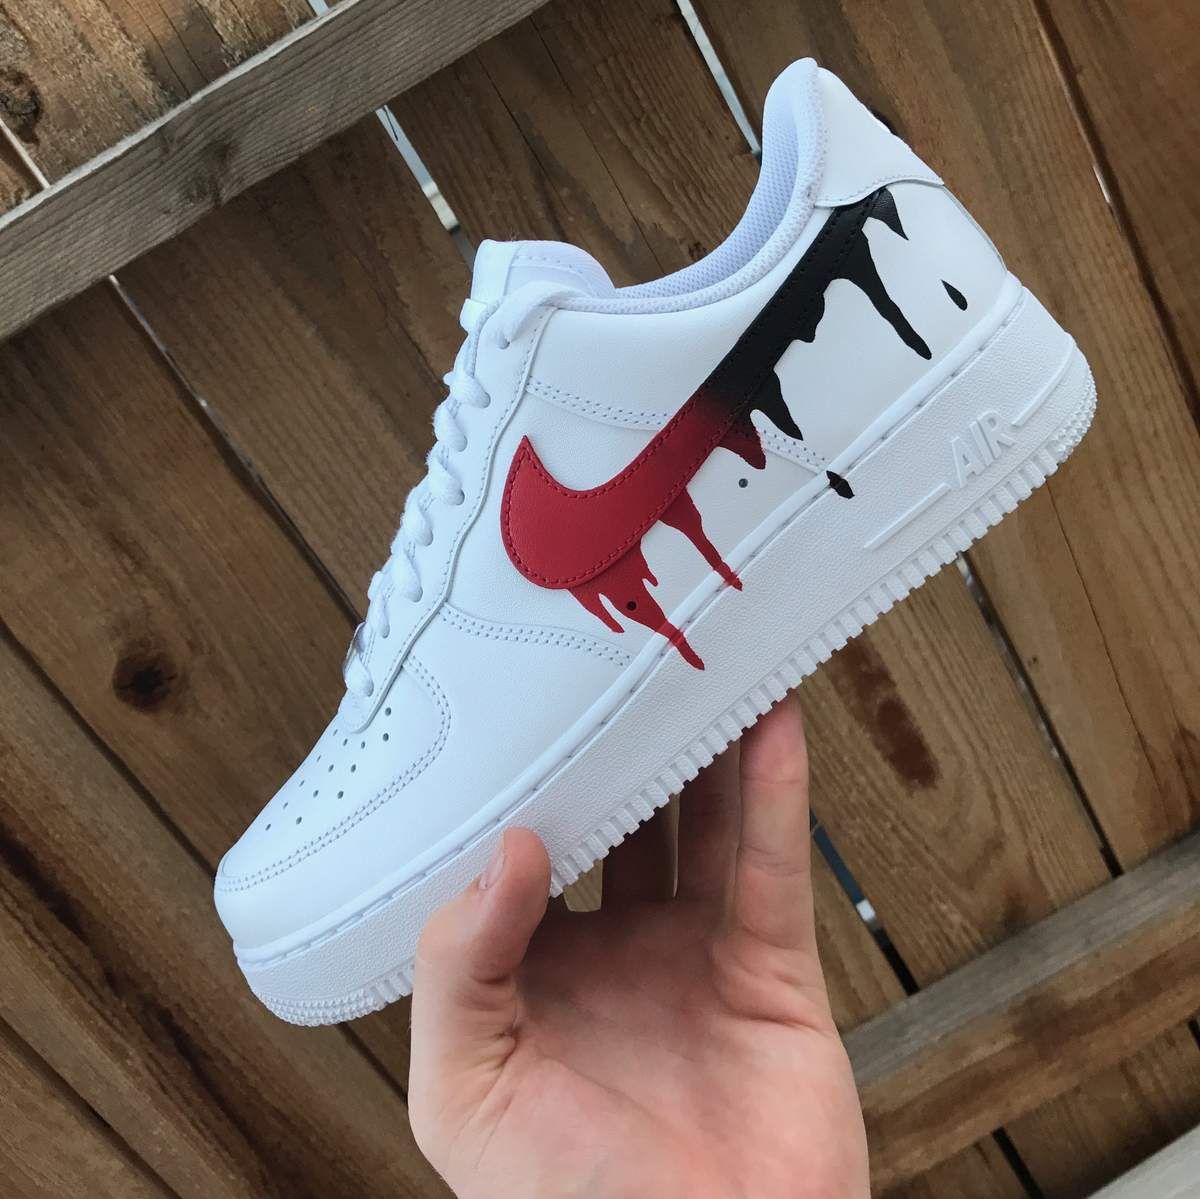 Higgins Destino El hotel YouFashion on Twitter: "nike air force 1 red : Nike Air Force 1 Black/Red  Drip - #Shoes - https://t.co/bKHZch8CRz https://t.co/WKZmt1lN81" / Twitter